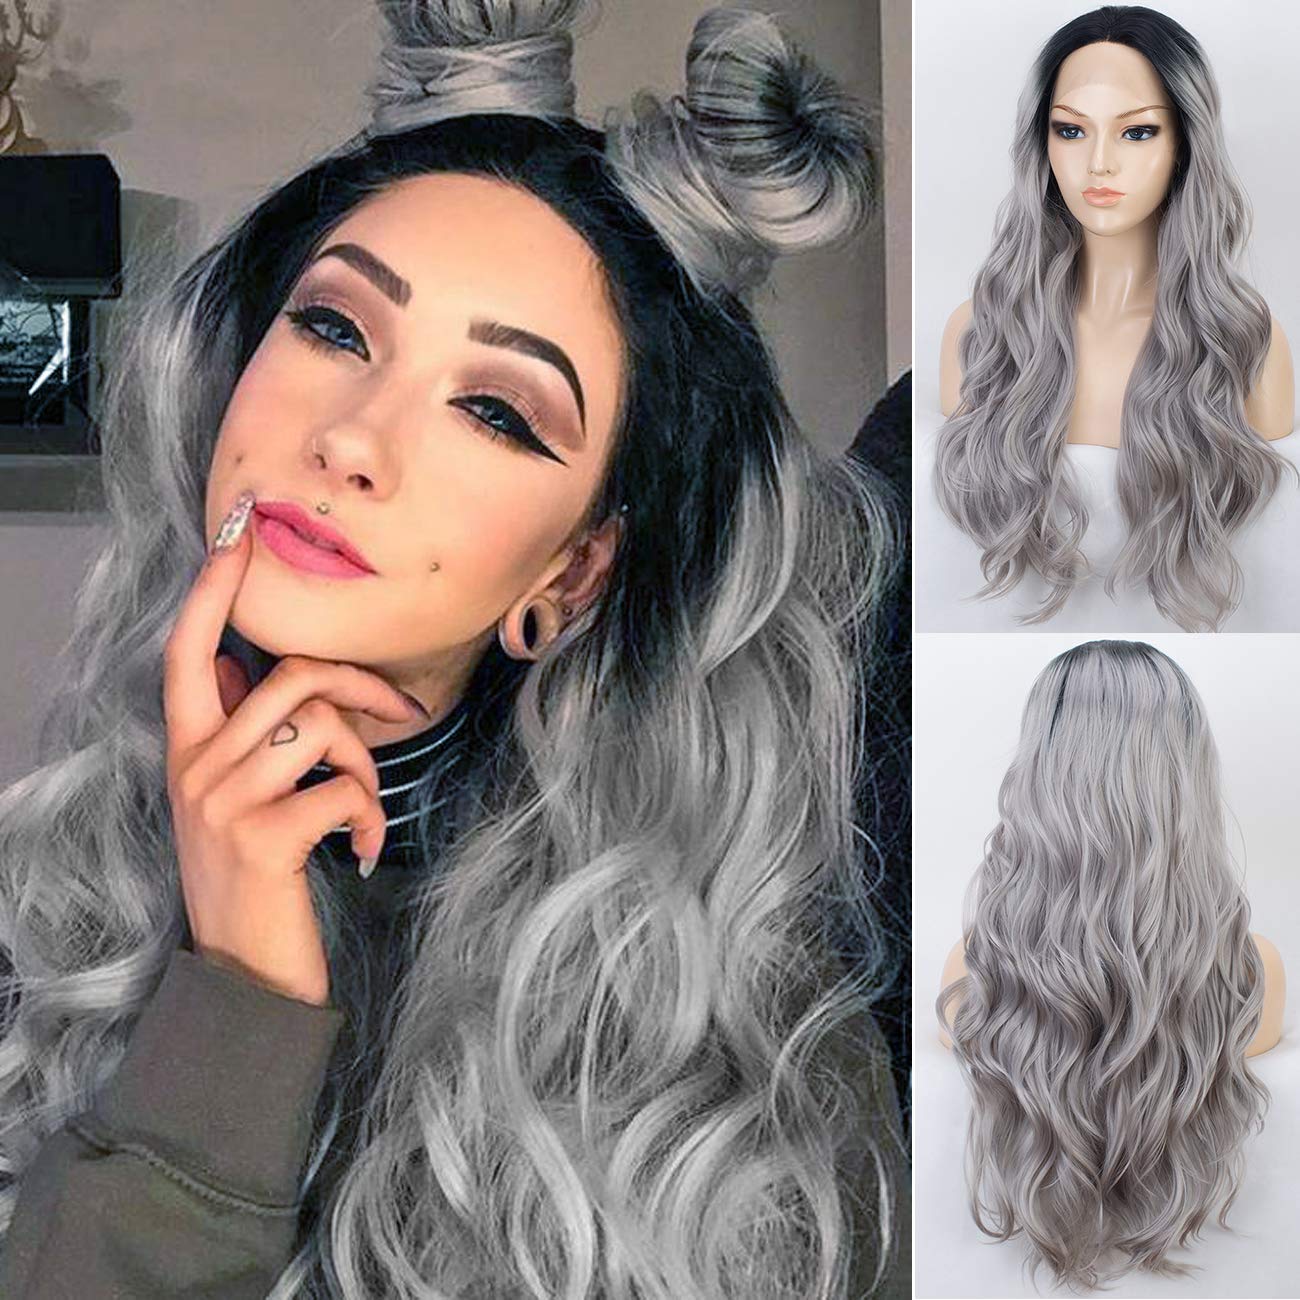 Price:$40.99    K'ryssma Ombre Grey Lace Front Wig with Black Roots L Part Long Wavy Synthetic Wigs for Women Middle Part Silver Gray Heat Resistant Synthetic Lace Wigs 20 inches  Beauty